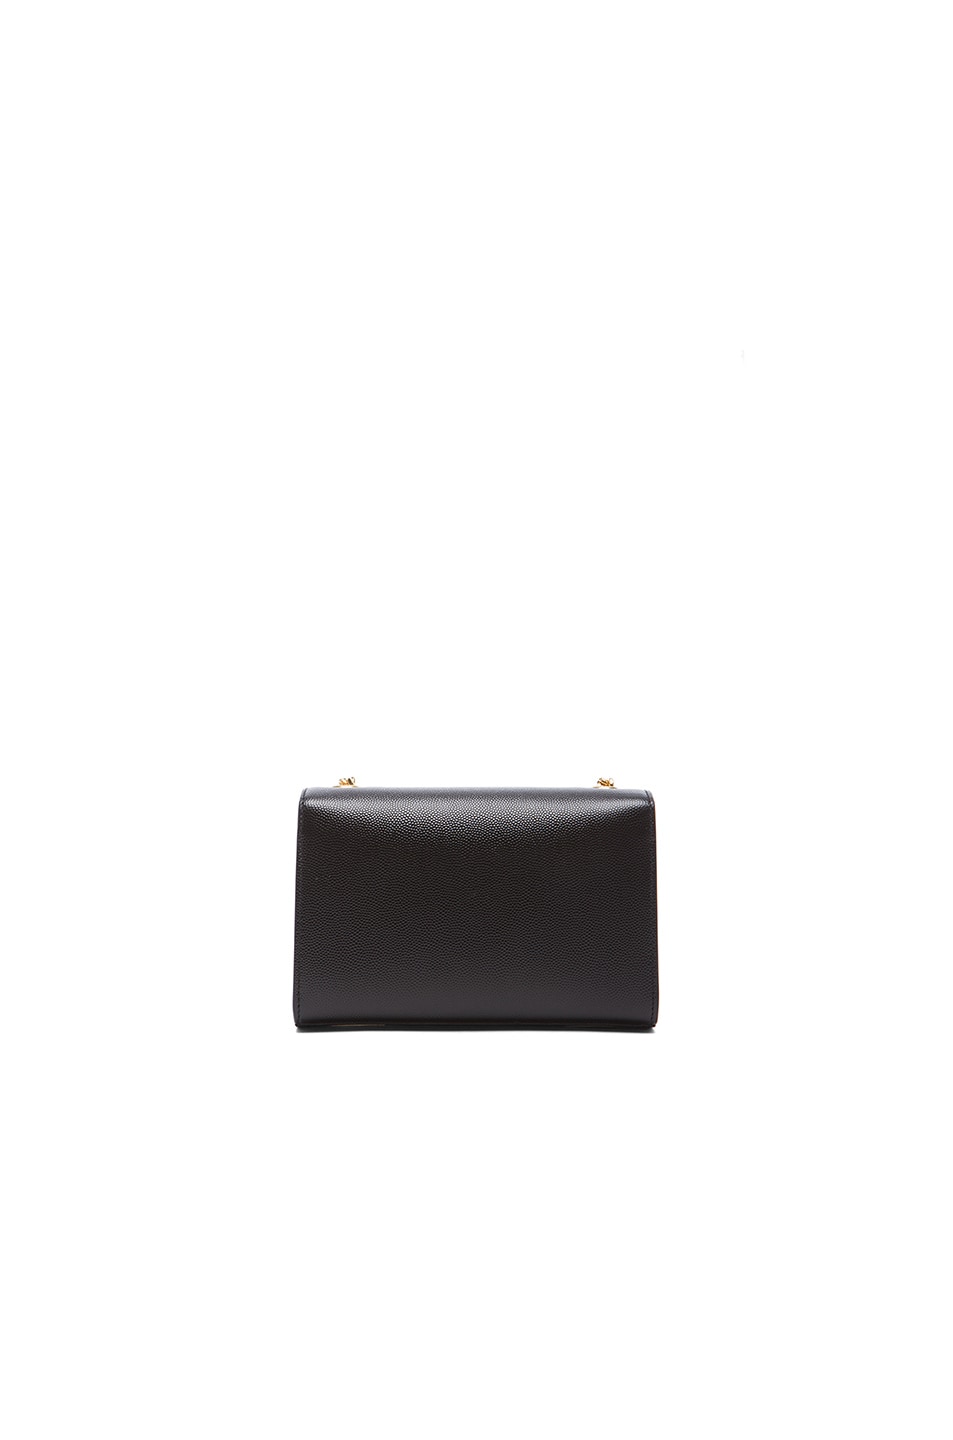 Saint Laurent Small Leather Monogramme Kate Chain Bag in Black | FWRD